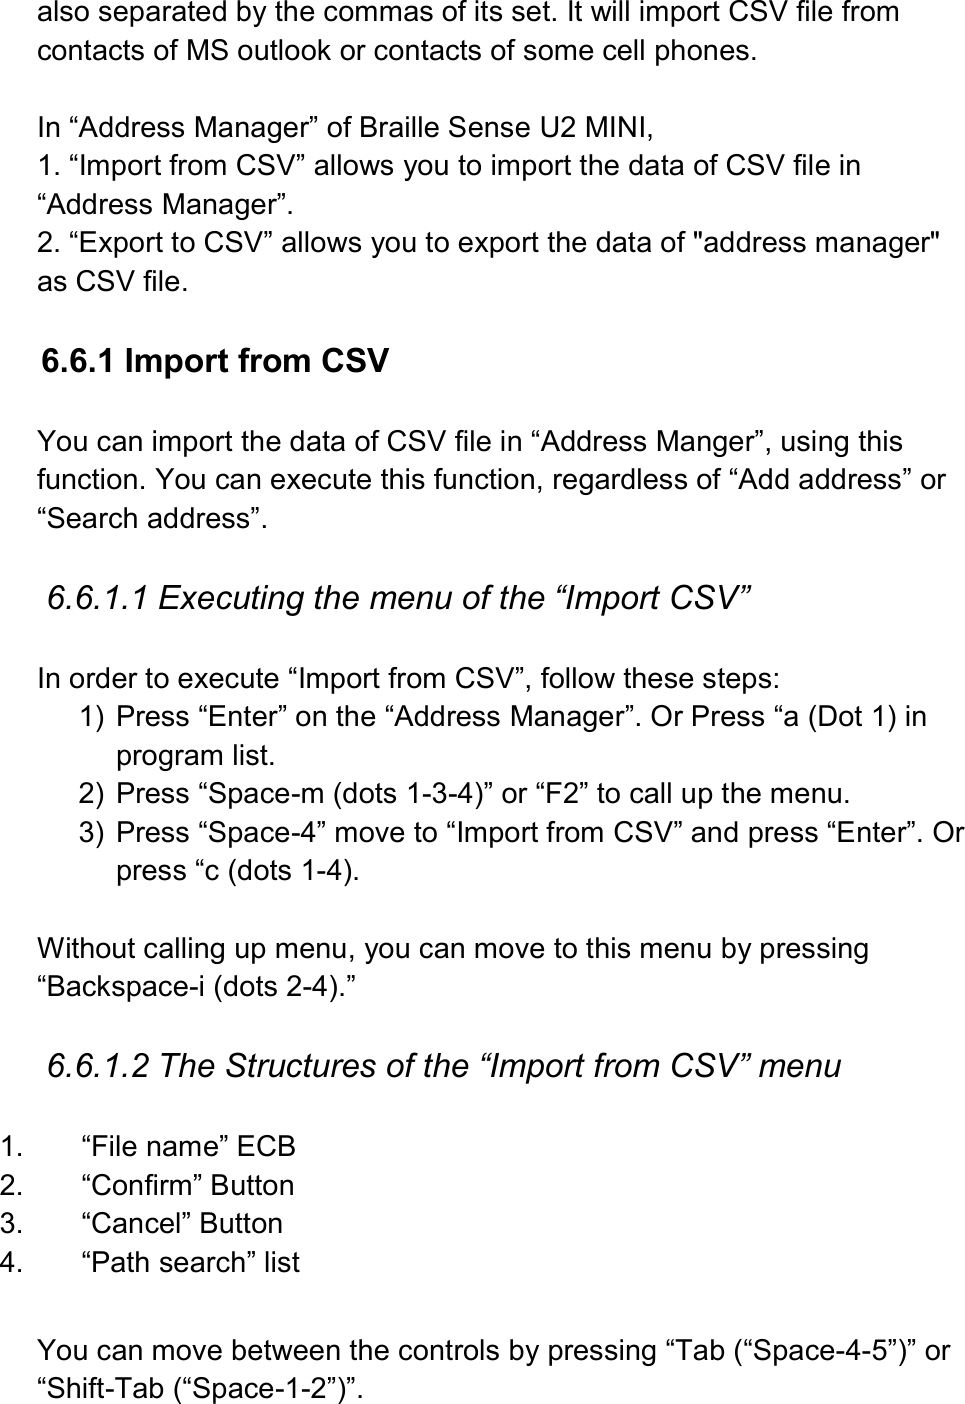  also separated by the commas of its set. It will import CSV file from contacts of MS outlook or contacts of some cell phones.  In “Address Manager” of Braille Sense U2 MINI, 1. “Import from CSV” allows you to import the data of CSV file in “Address Manager”. 2. “Export to CSV” allows you to export the data of &quot;address manager&quot; as CSV file.  6.6.1 Import from CSV  You can import the data of CSV file in “Address Manger”, using this function. You can execute this function, regardless of “Add address” or “Search address”.  6.6.1.1 Executing the menu of the “Import CSV”  In order to execute “Import from CSV”, follow these steps: 1)  Press “Enter” on the “Address Manager”. Or Press “a (Dot 1) in program list. 2)  Press “Space-m (dots 1-3-4)” or “F2” to call up the menu. 3)  Press “Space-4” move to “Import from CSV” and press “Enter”. Or press “c (dots 1-4).  Without calling up menu, you can move to this menu by pressing “Backspace-i (dots 2-4).”  6.6.1.2 The Structures of the “Import from CSV” menu  1.  “File name” ECB 2.  “Confirm” Button 3.  “Cancel” Button 4.  “Path search” list  You can move between the controls by pressing “Tab (“Space-4-5”)” or “Shift-Tab (“Space-1-2”)”. 